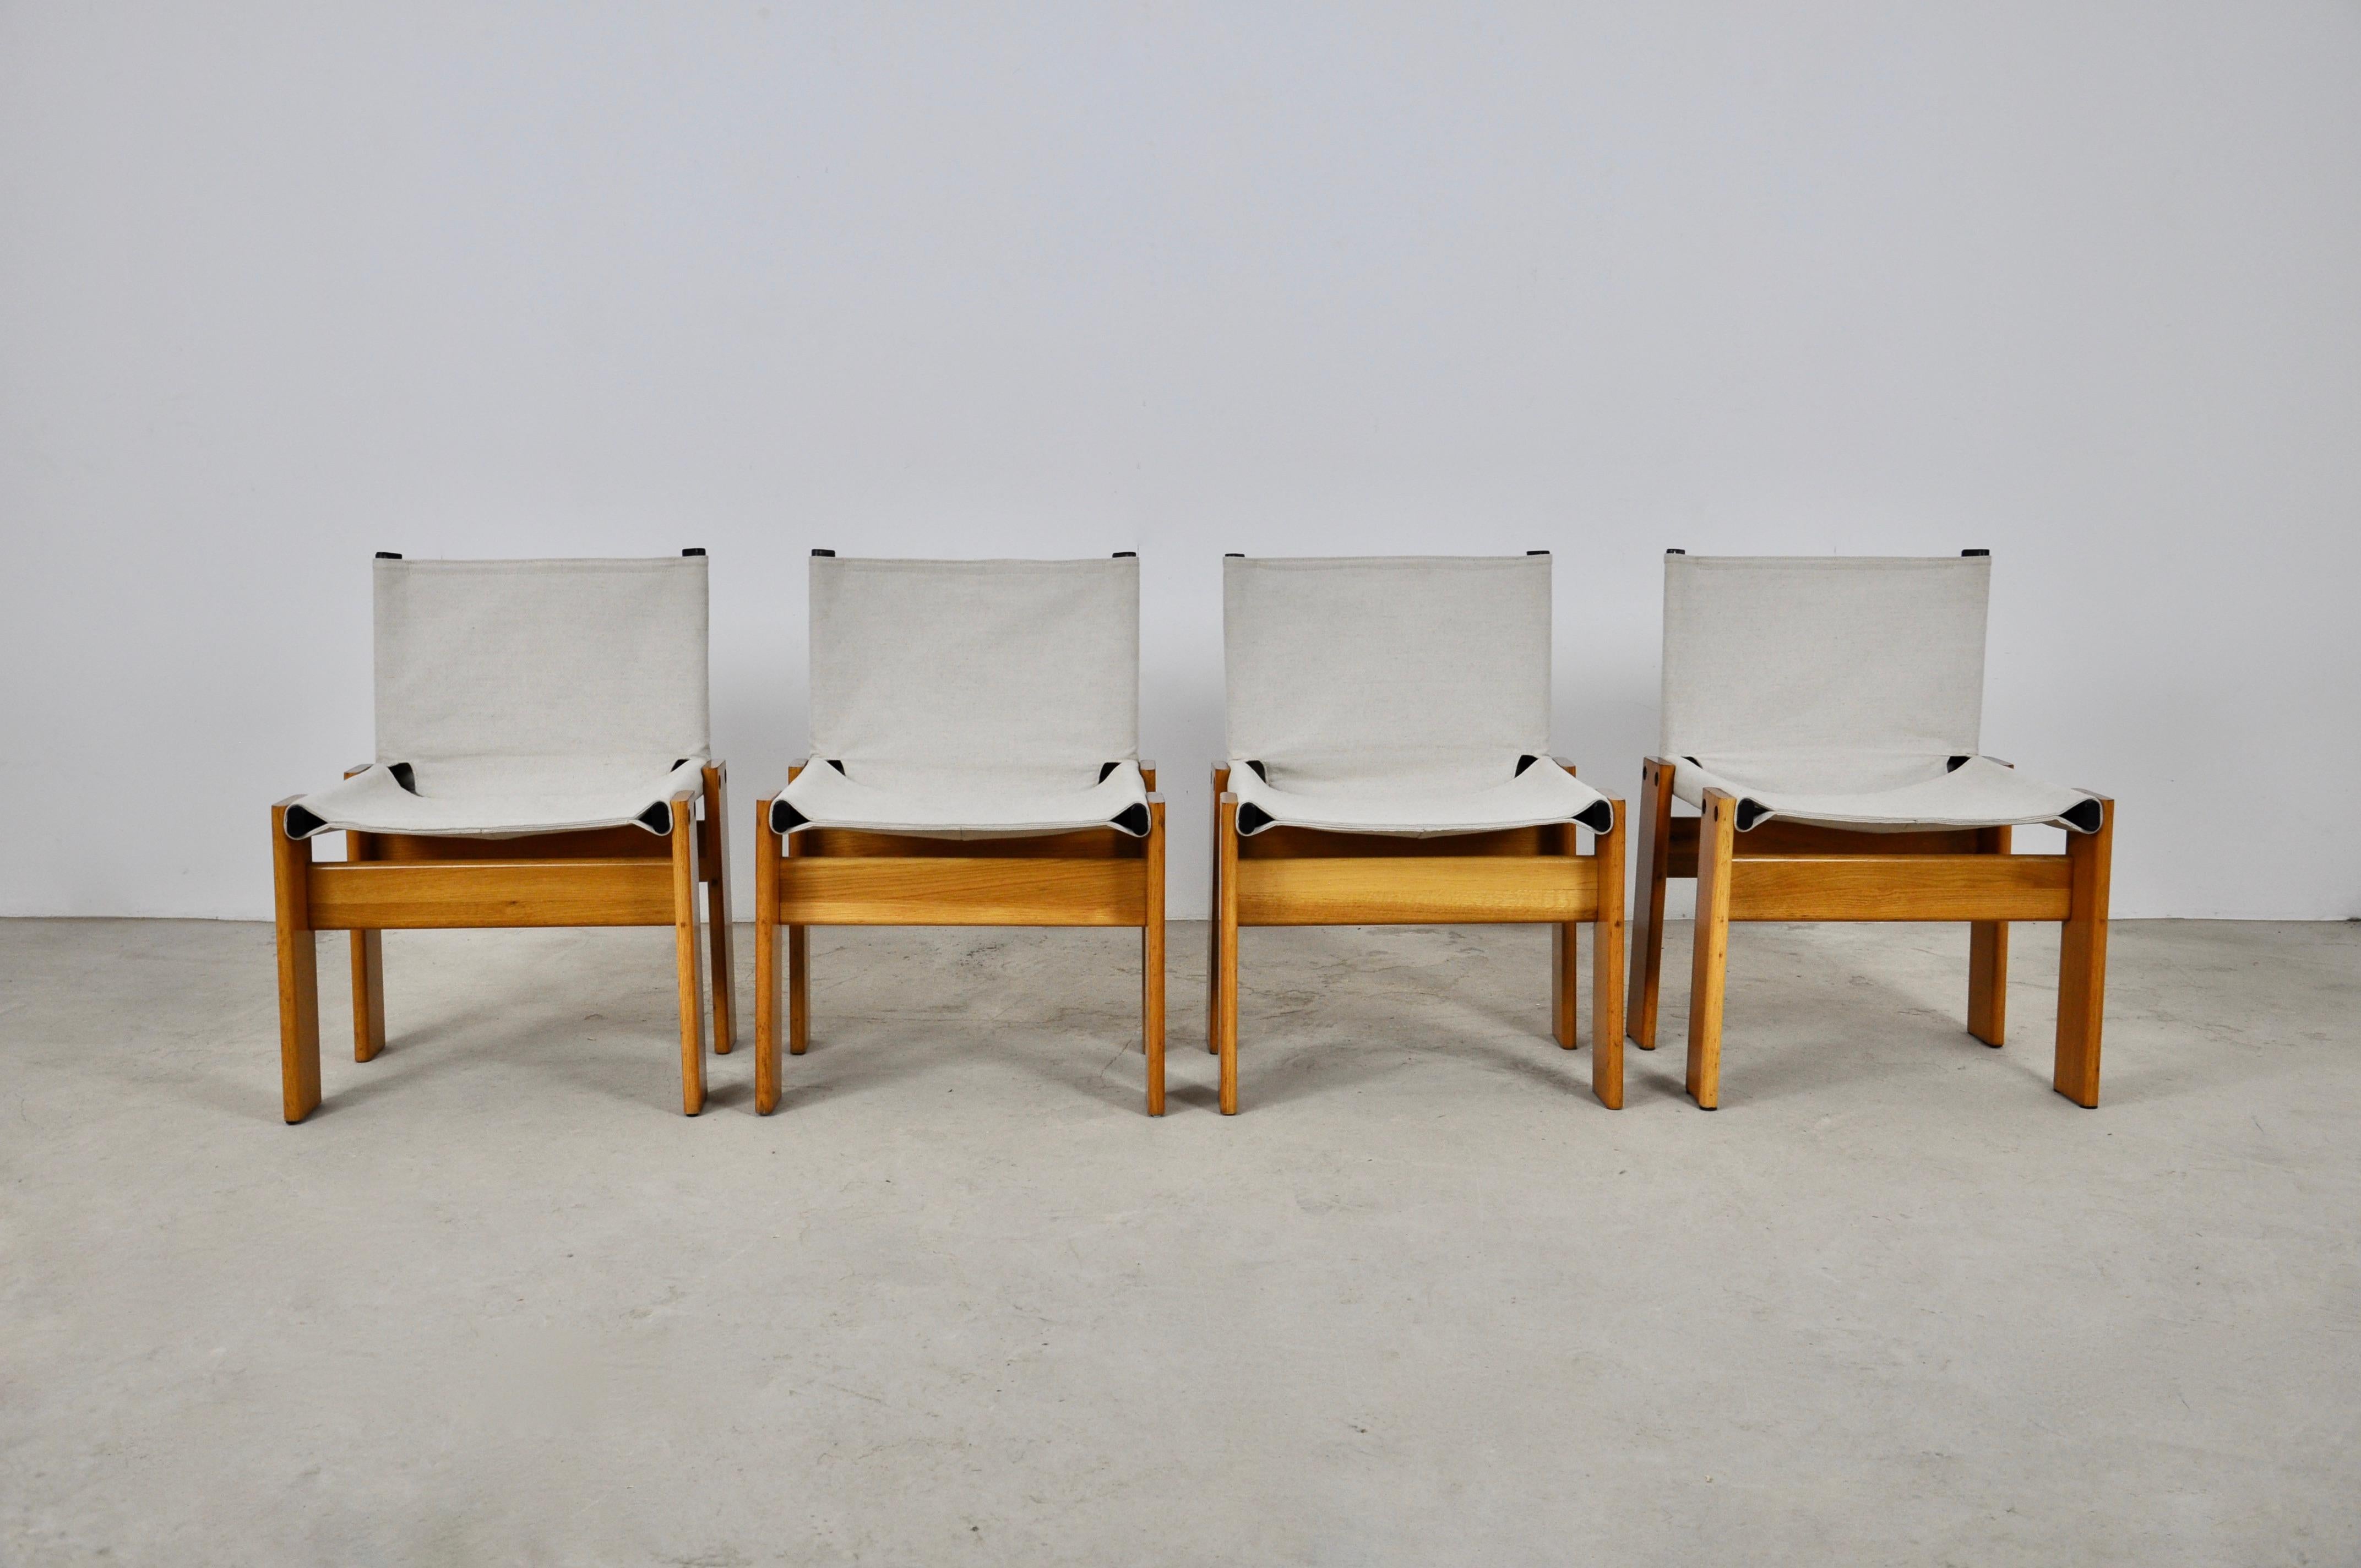 Set of 4 chairs in fabric and wood. Hessian fabric. Seat height: 44cm 
Wear due to time and age of the chairs.